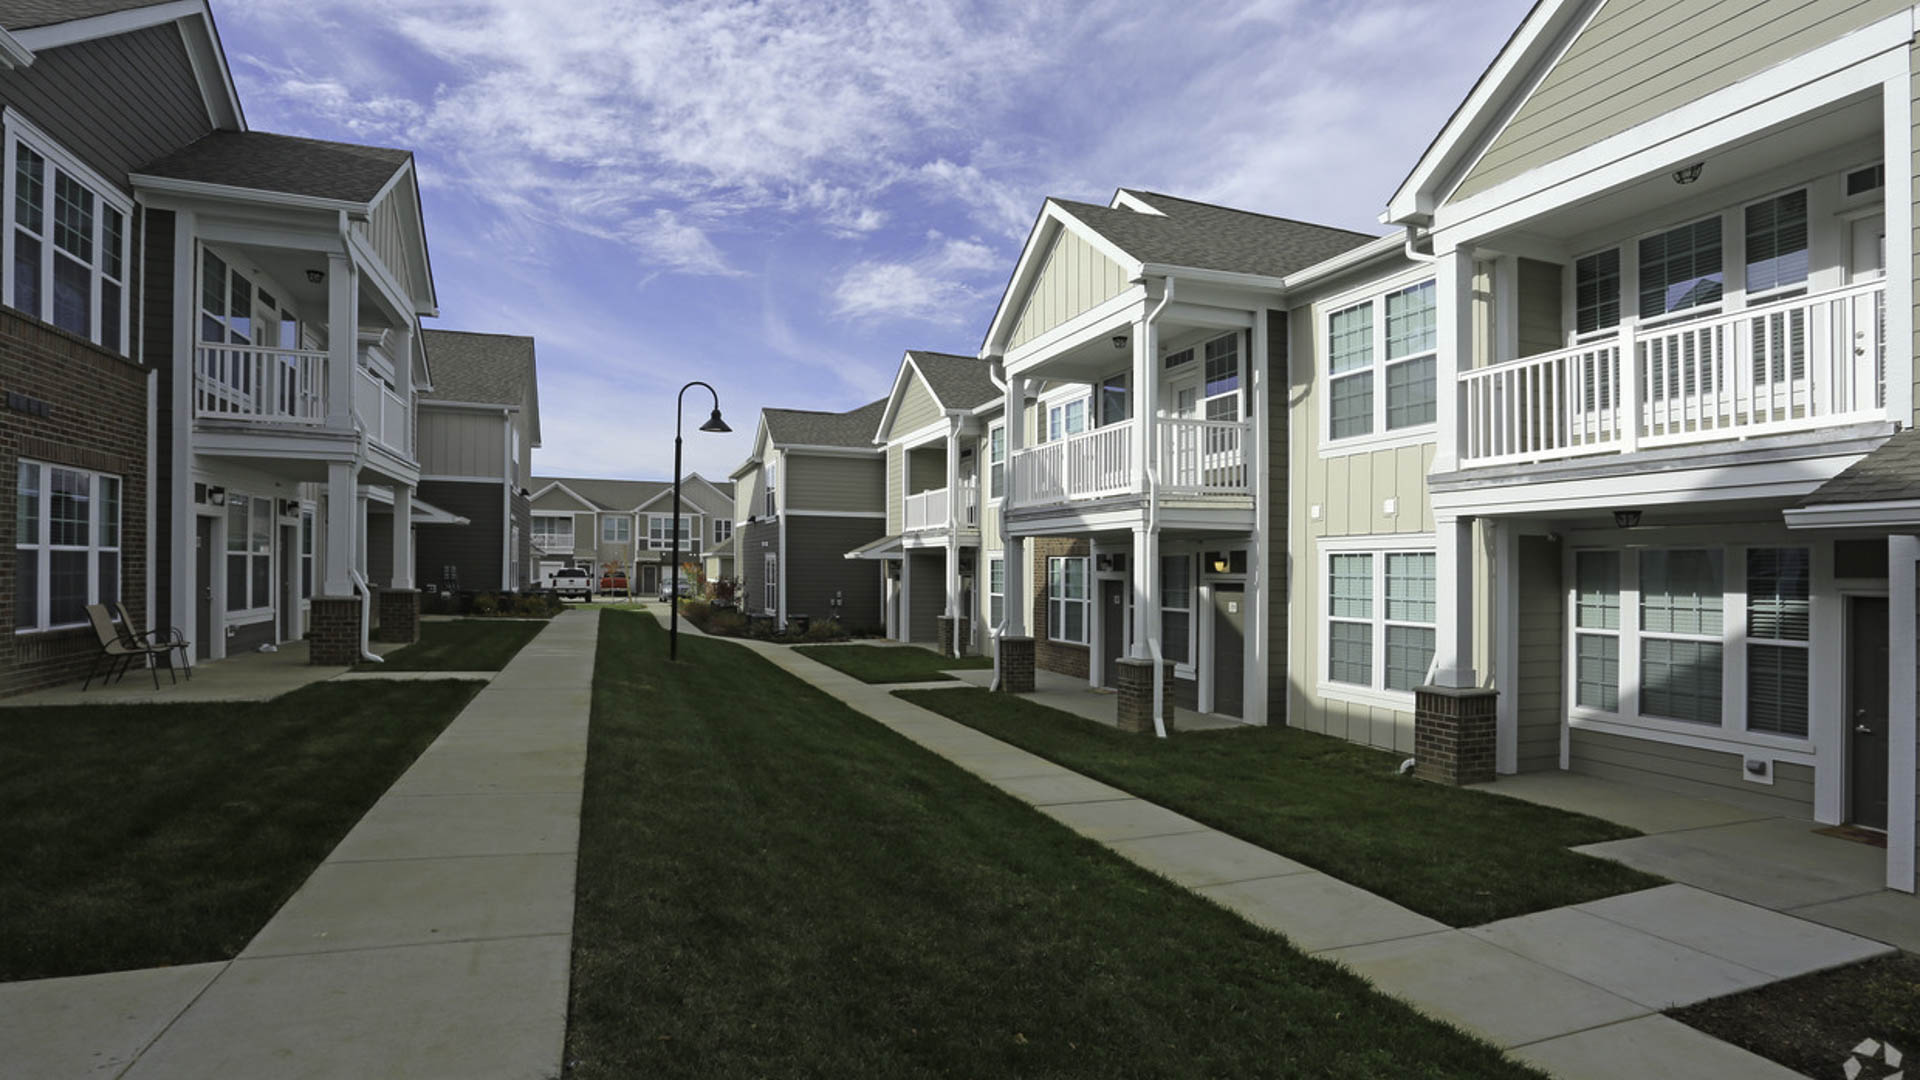 Springs at Hurstbourne apartment exteriors and walking path